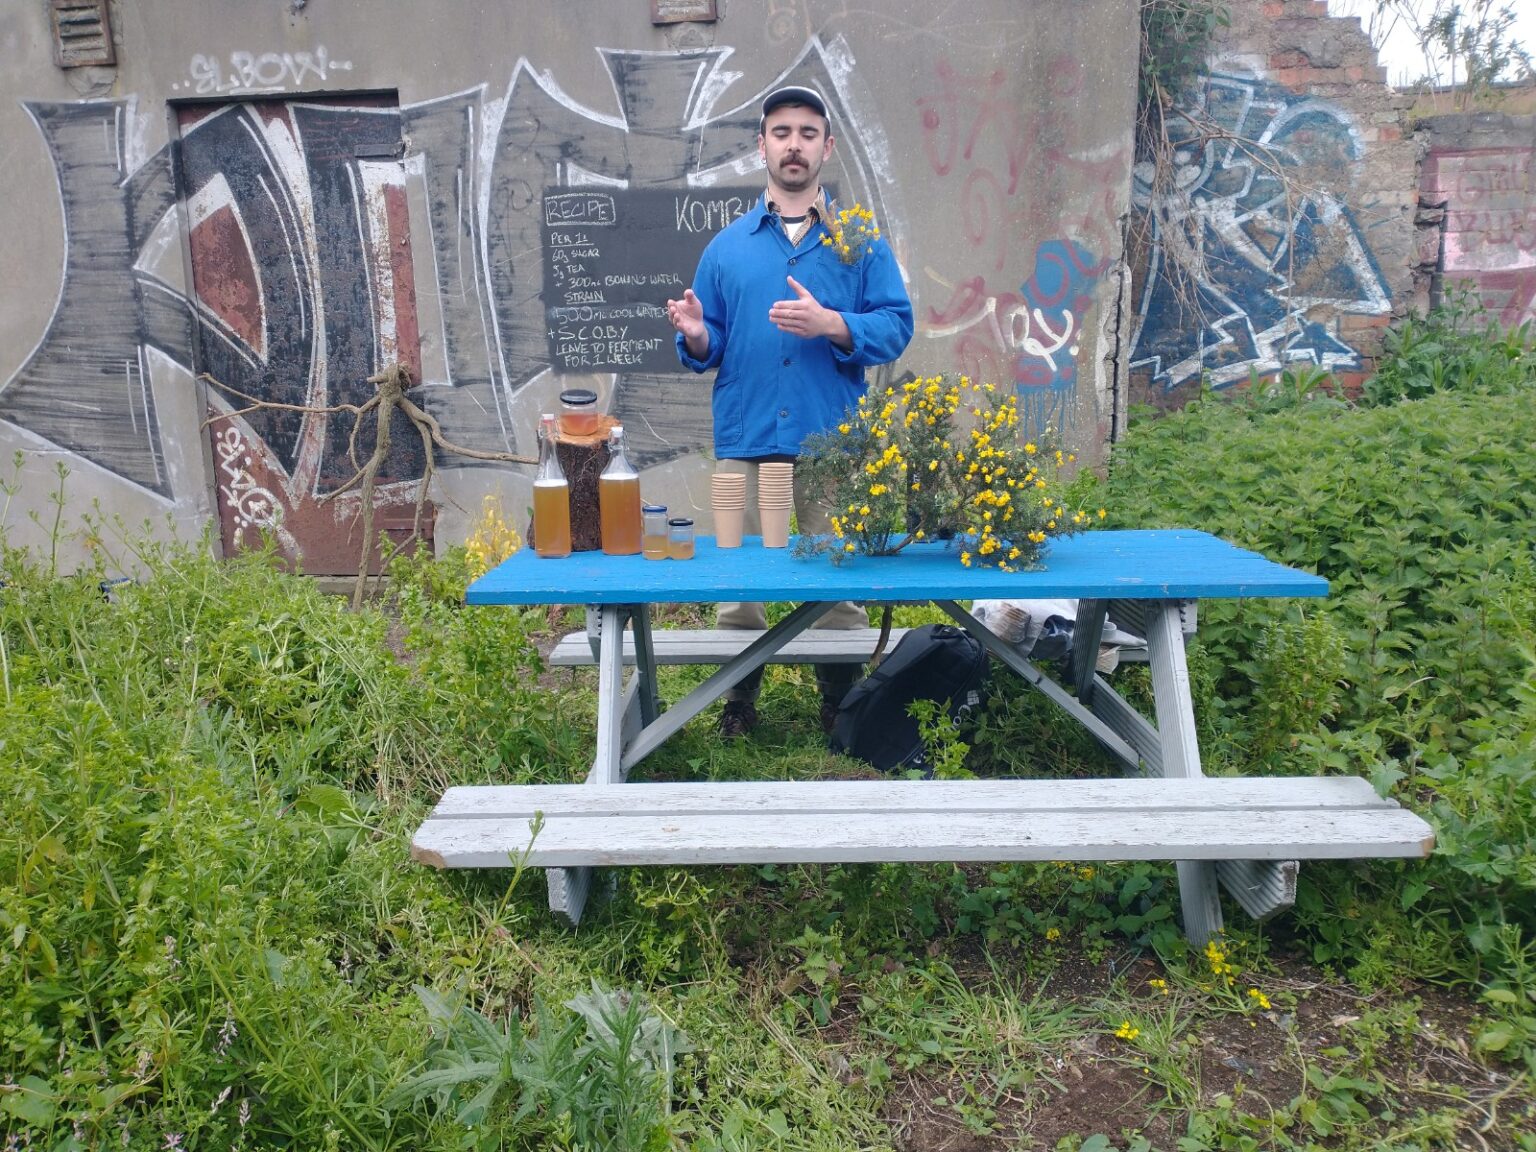 A person stands behind a picnic bench in NCAD's FIELD. The person wears a baseball cap and a blue jacket. They are gesturing as if they are talking to a group. There are bottles of an orange coloured drink and paper cups on the table in front of the, along with branches of a gorse bush. There is a wall behind them, with a recipe for kombucha written in chalk on a black, painted square.